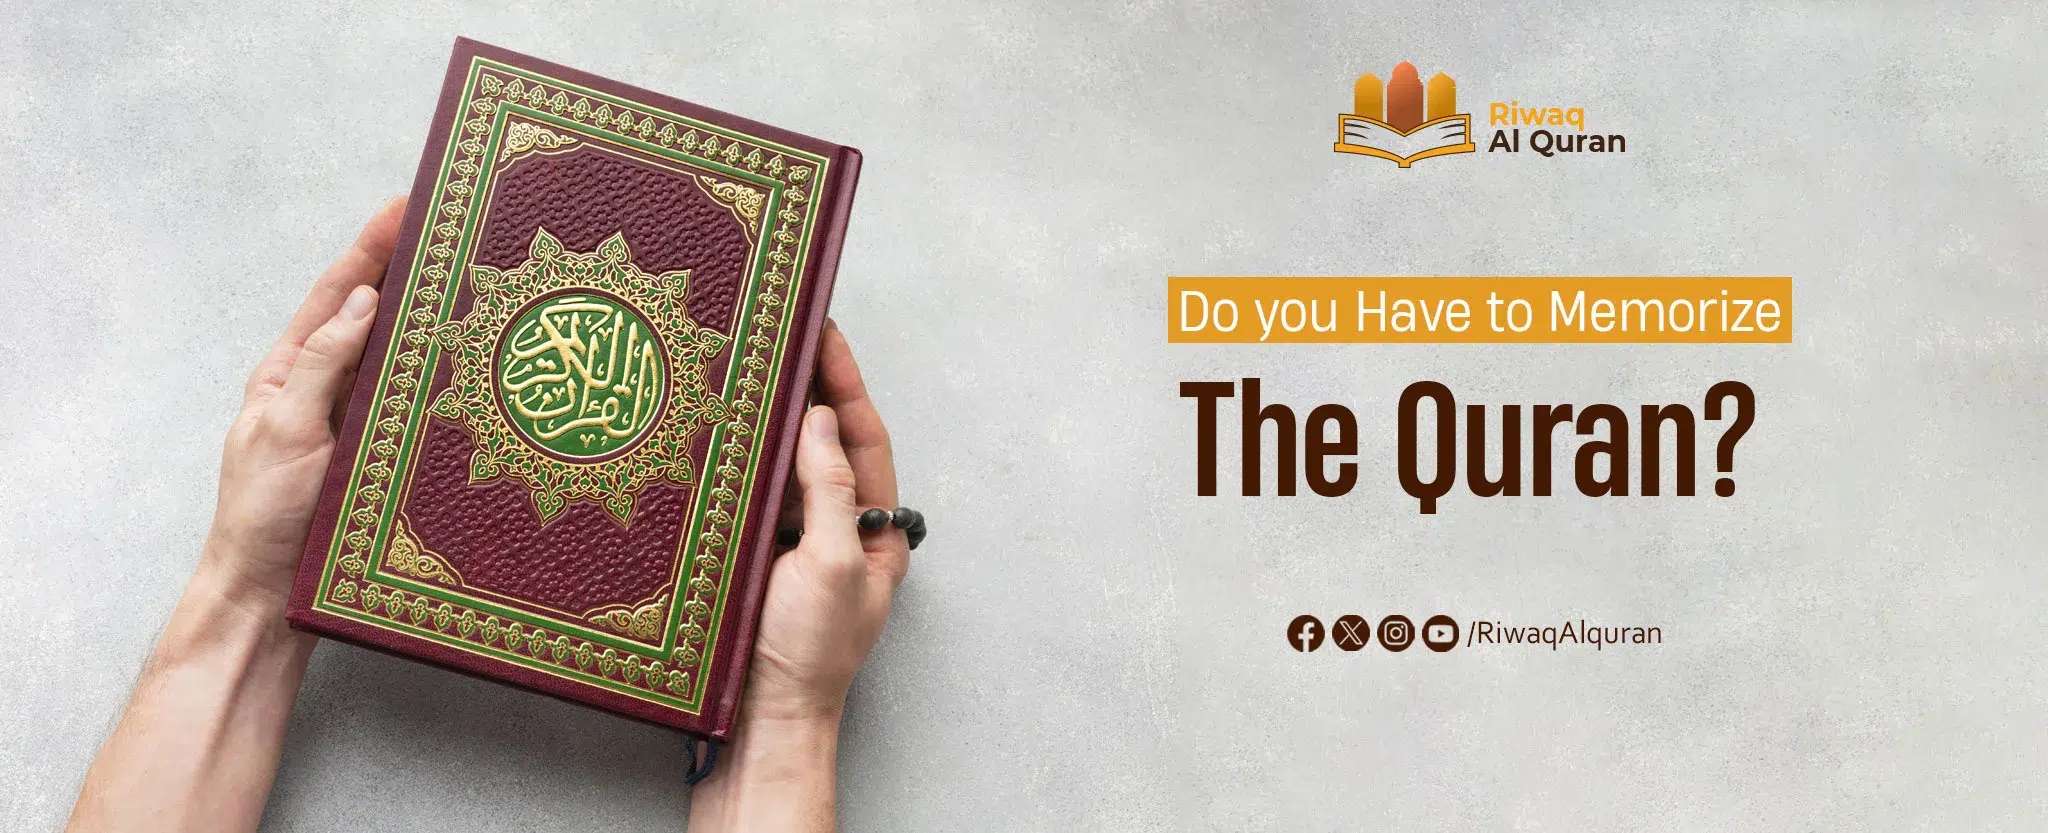 Do You Have to Memorize the Quran?